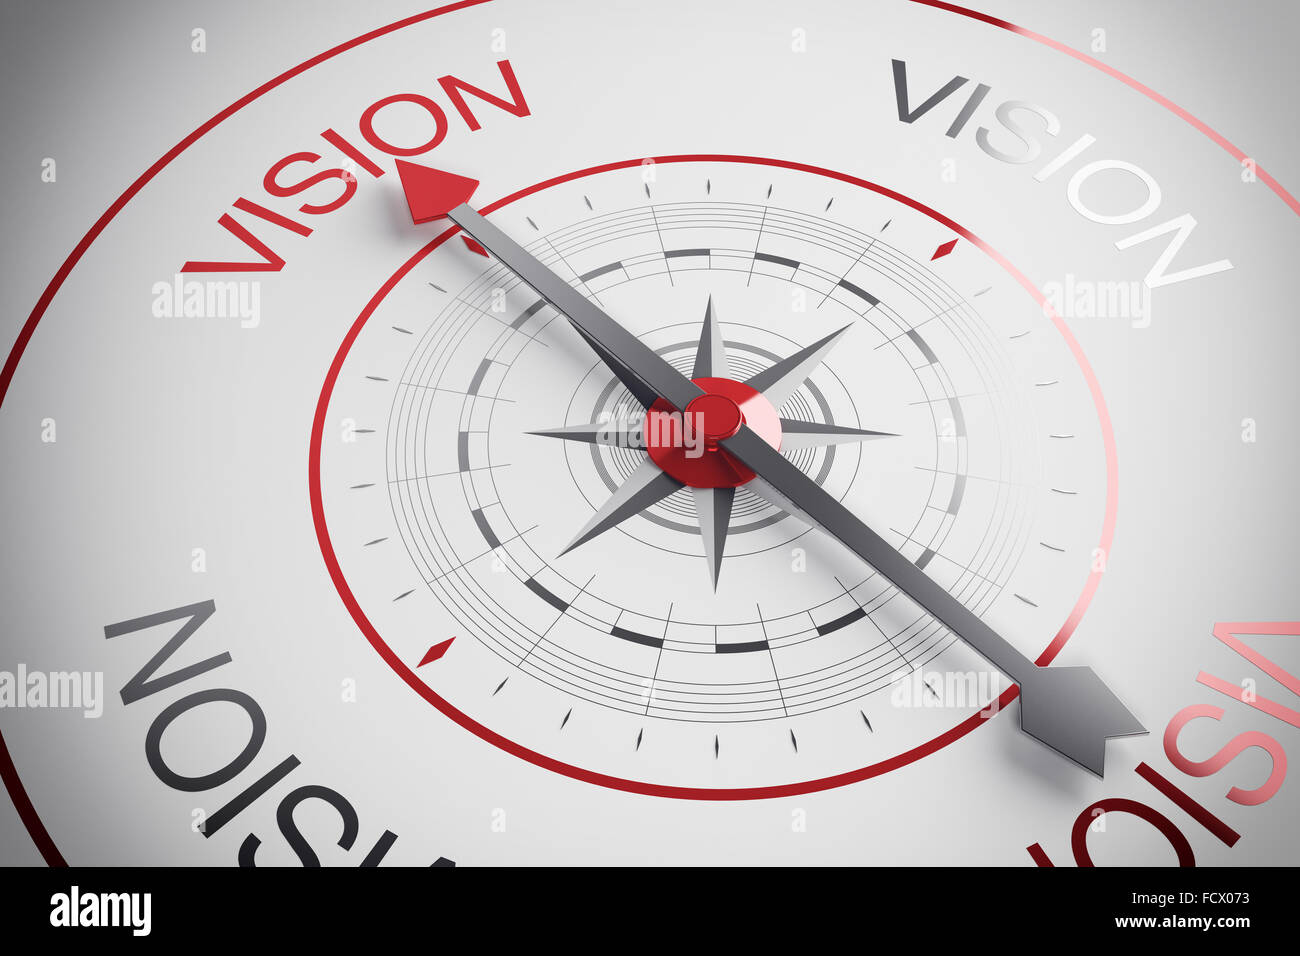 Vision compass Stock Photo